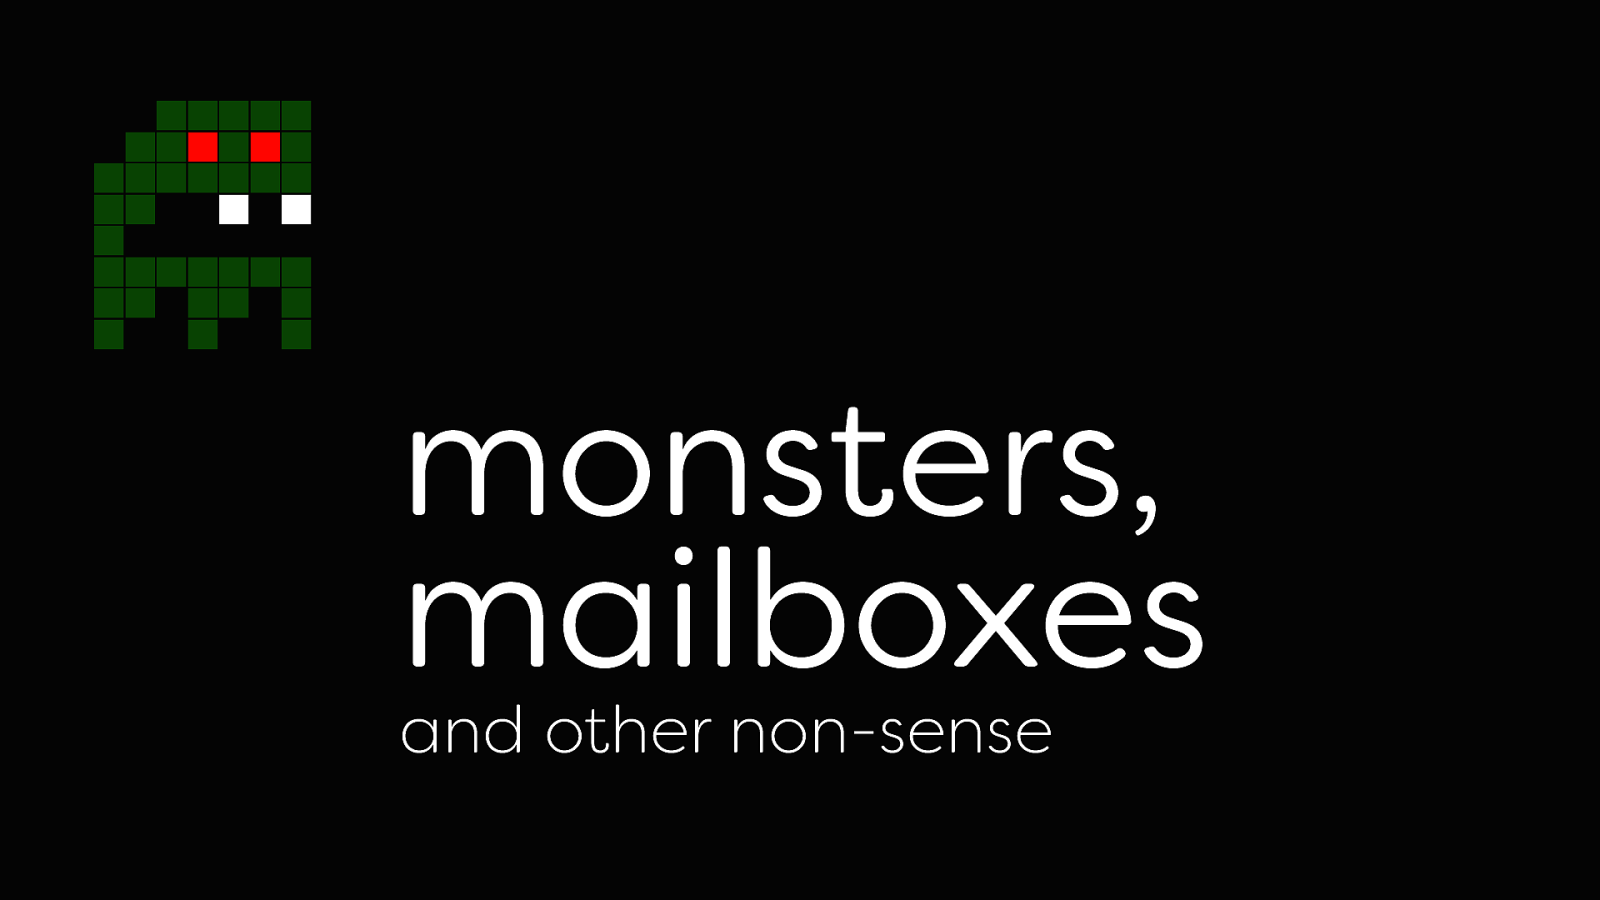 Monsters, mailboxes and other nonsense